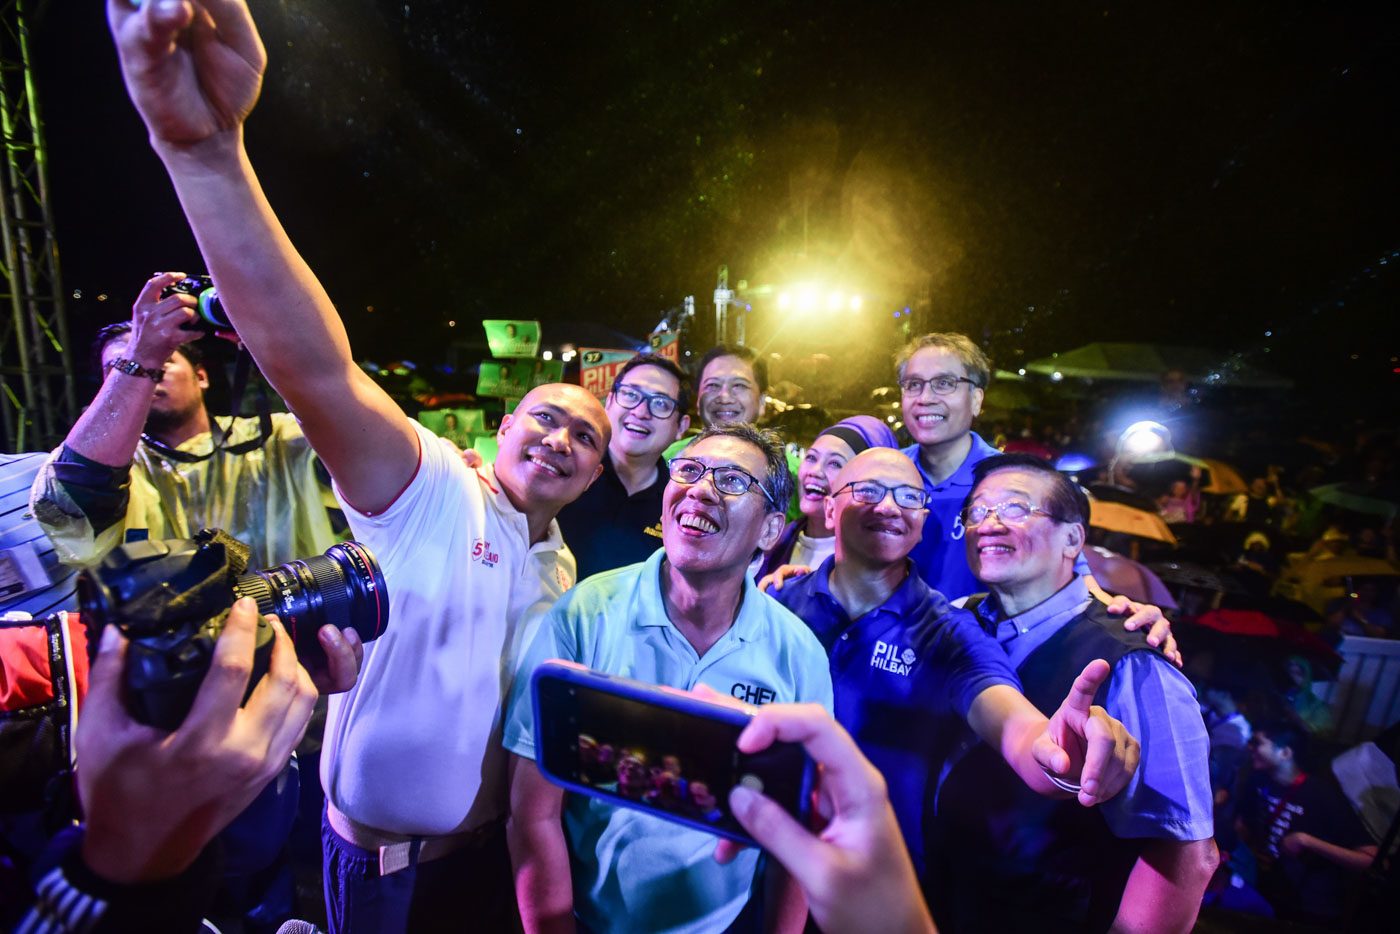 Otso Diretso thanks rain-soaked supporters: ‘You are the spirit of this campaign’